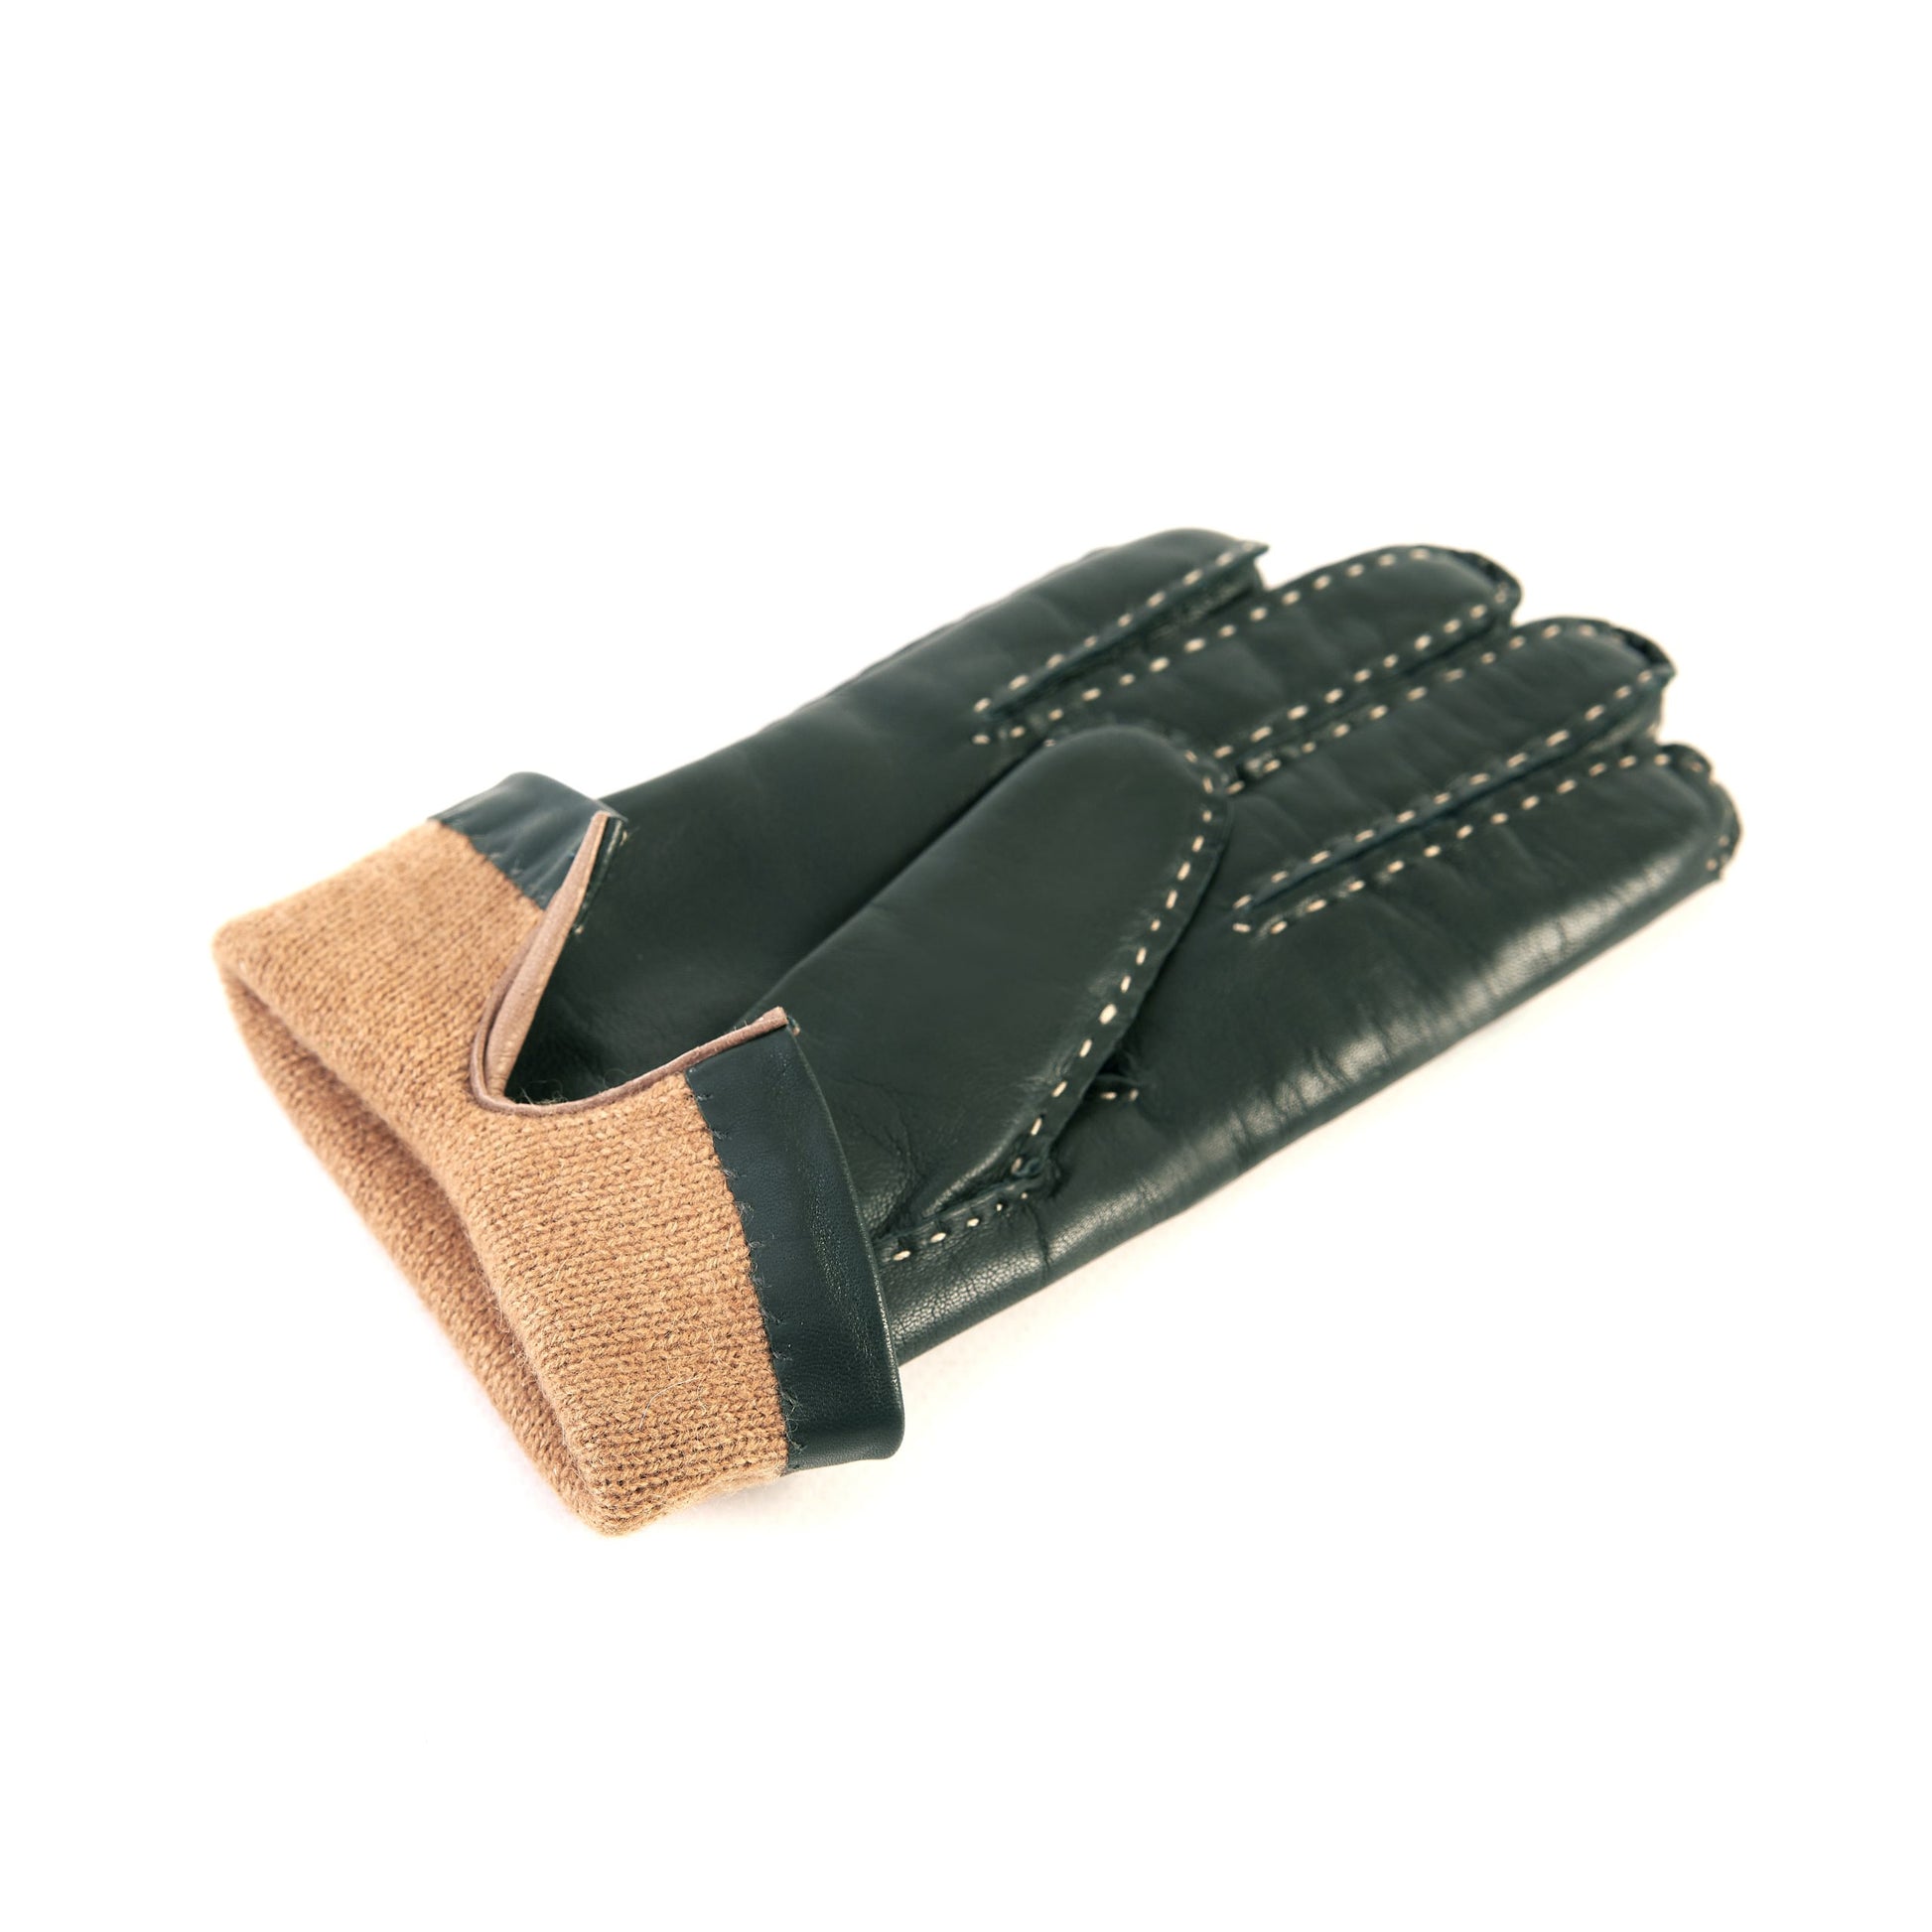 Women's classic dark green nappa leather gloves entirely hand-sewn with cashmere lining